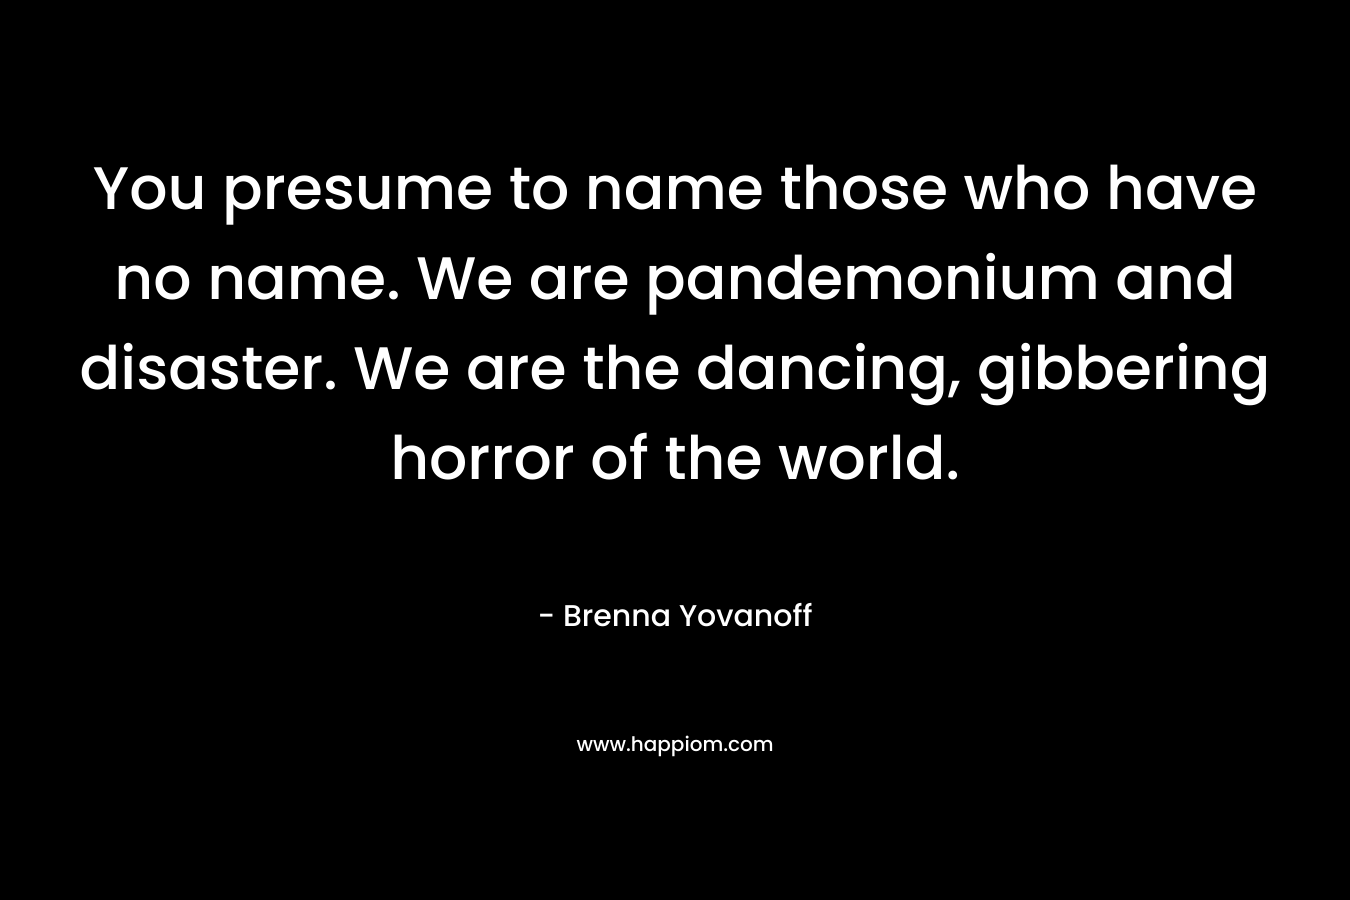 You presume to name those who have no name. We are pandemonium and disaster. We are the dancing, gibbering horror of the world. – Brenna Yovanoff